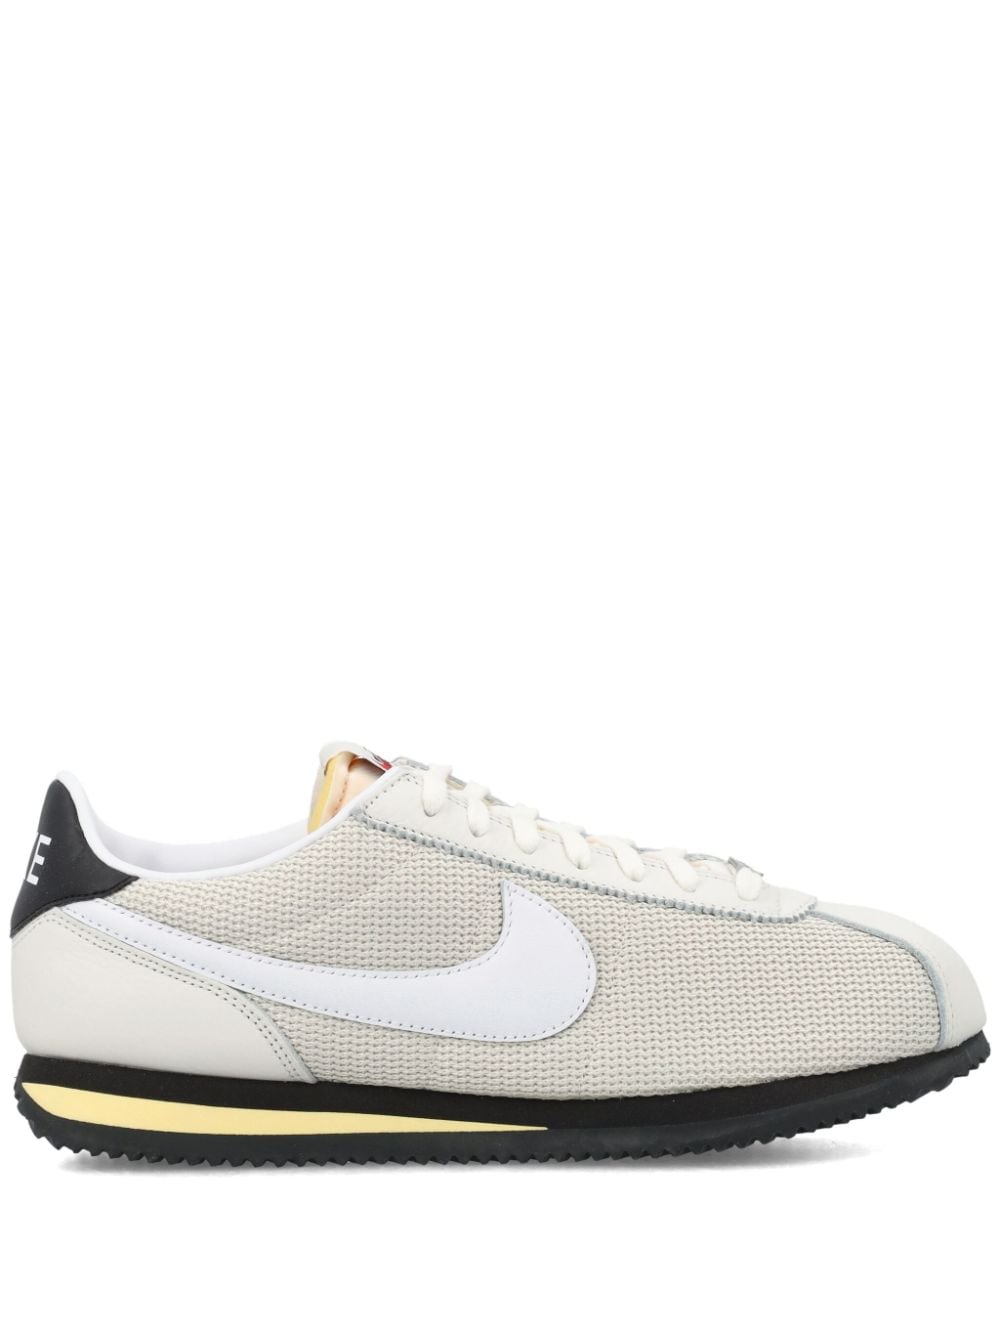 Cortez Leather Sneakers